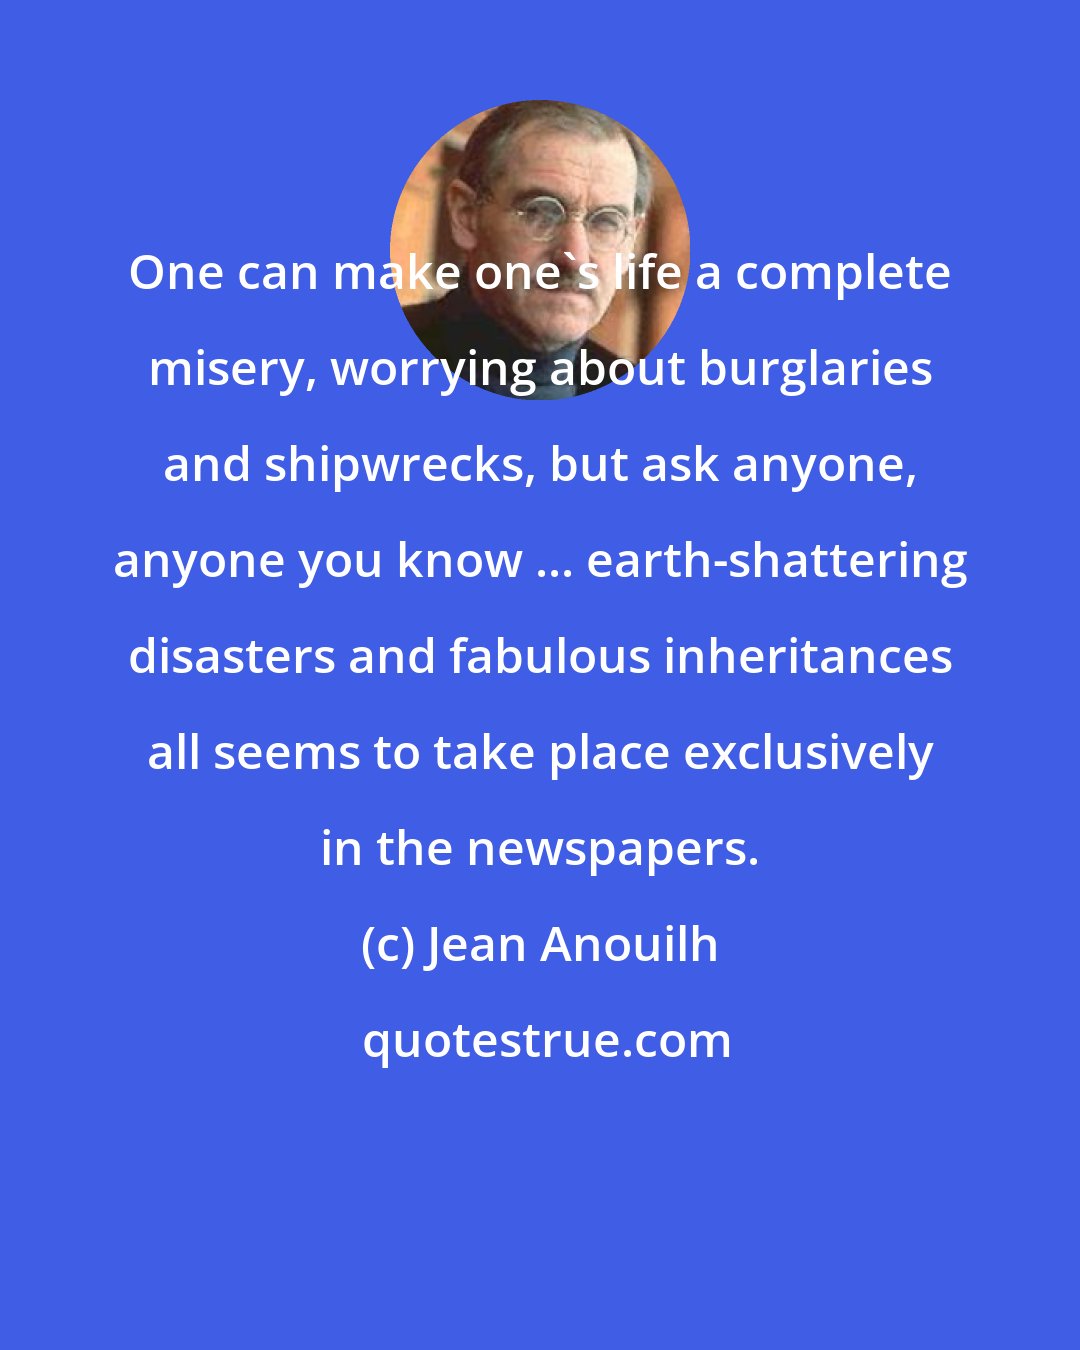 Jean Anouilh: One can make one's life a complete misery, worrying about burglaries and shipwrecks, but ask anyone, anyone you know ... earth-shattering disasters and fabulous inheritances all seems to take place exclusively in the newspapers.